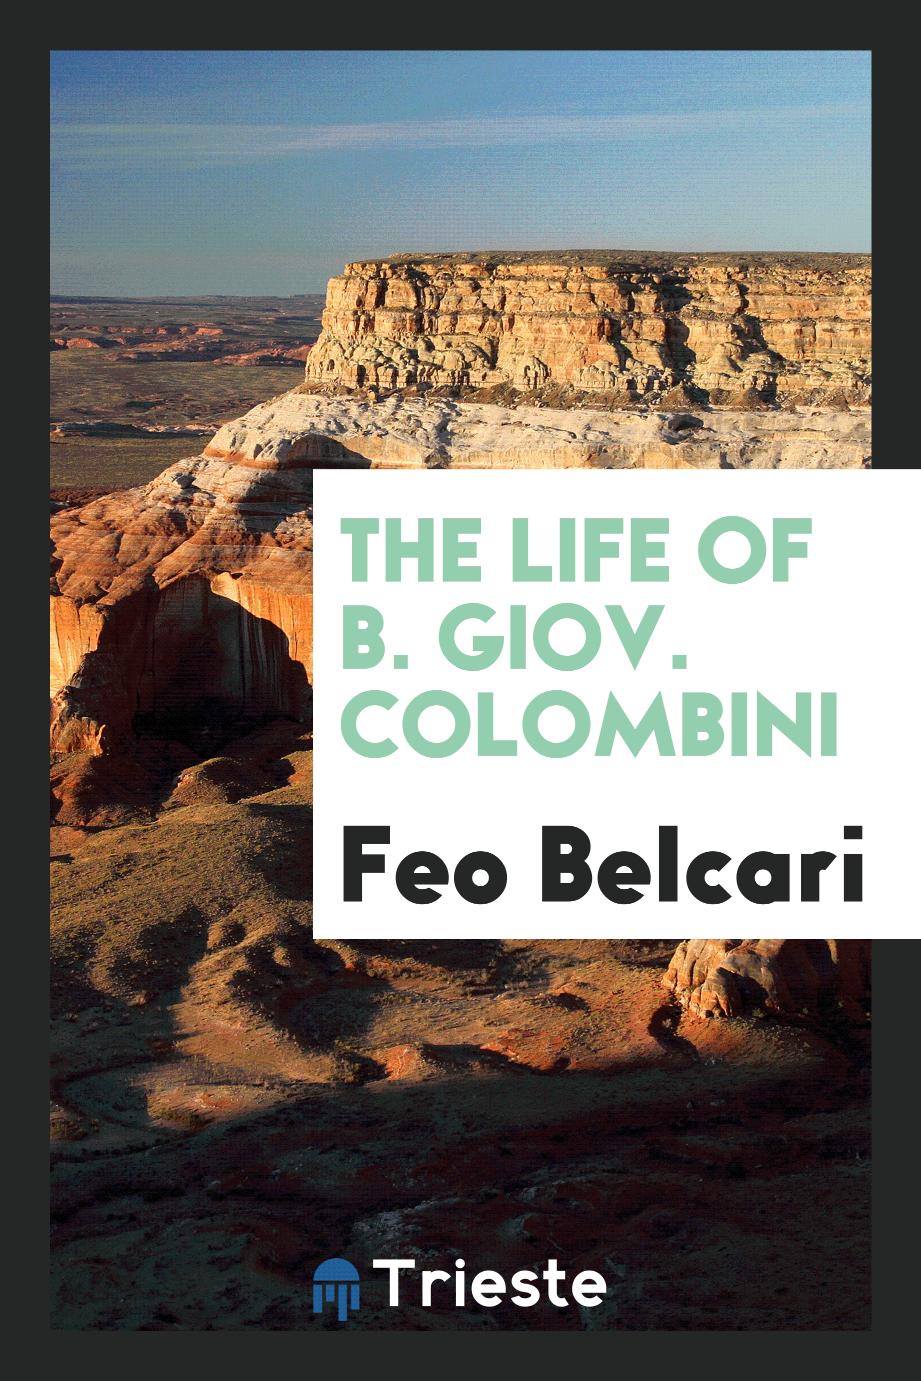 The life of B. Giov. Colombini